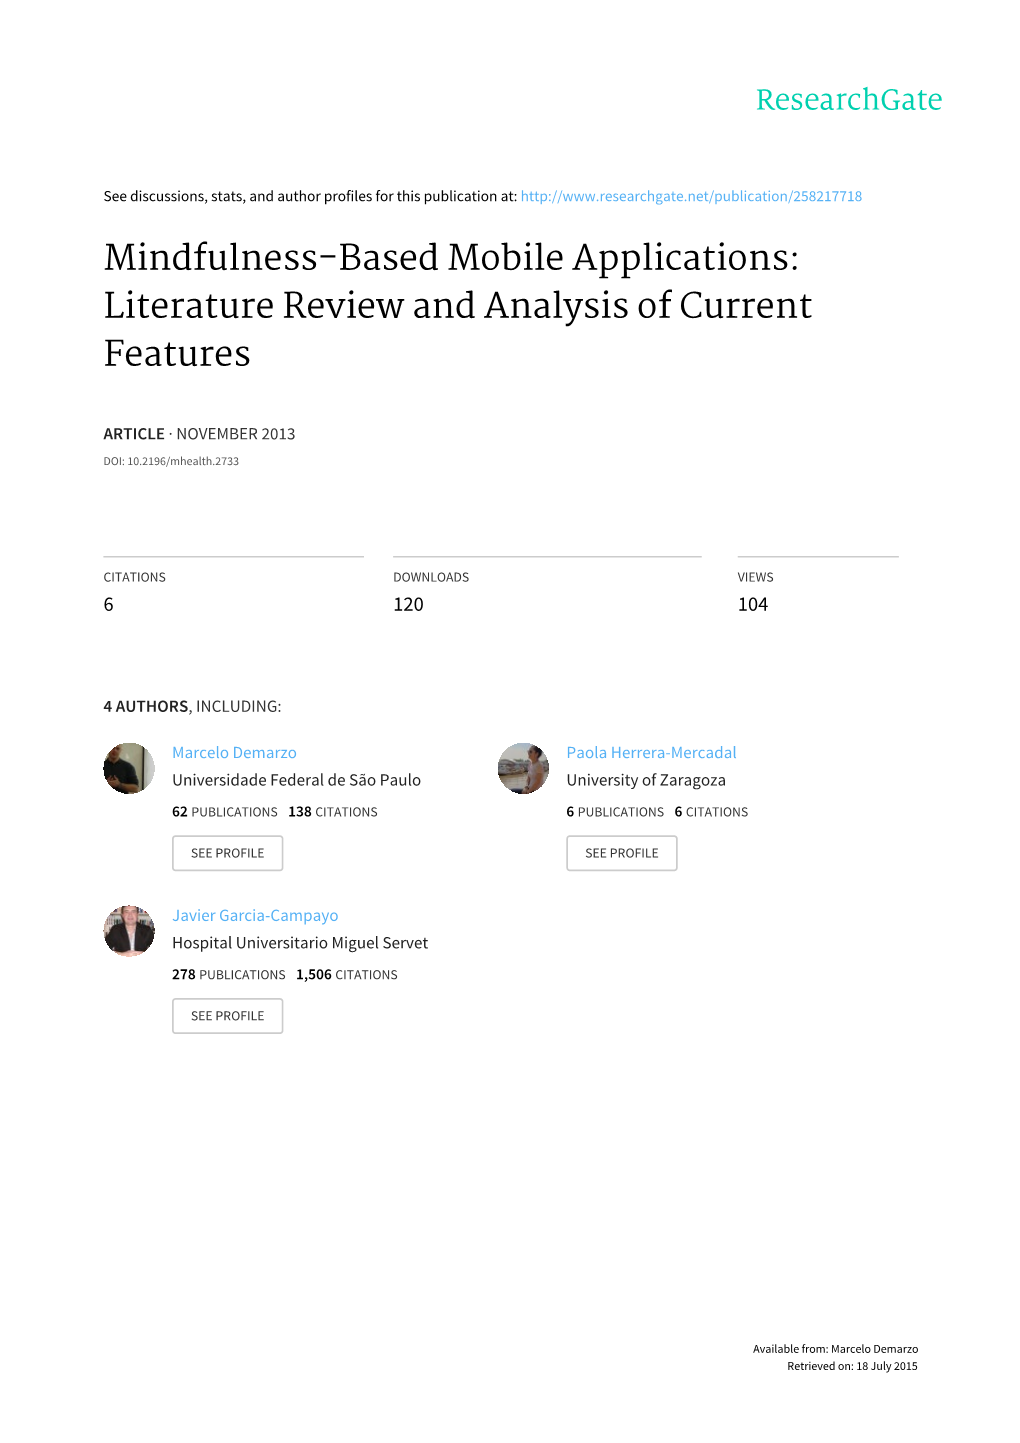 Mindfulness-Based Mobile Applications: Literature Review and Analysis of Current Features